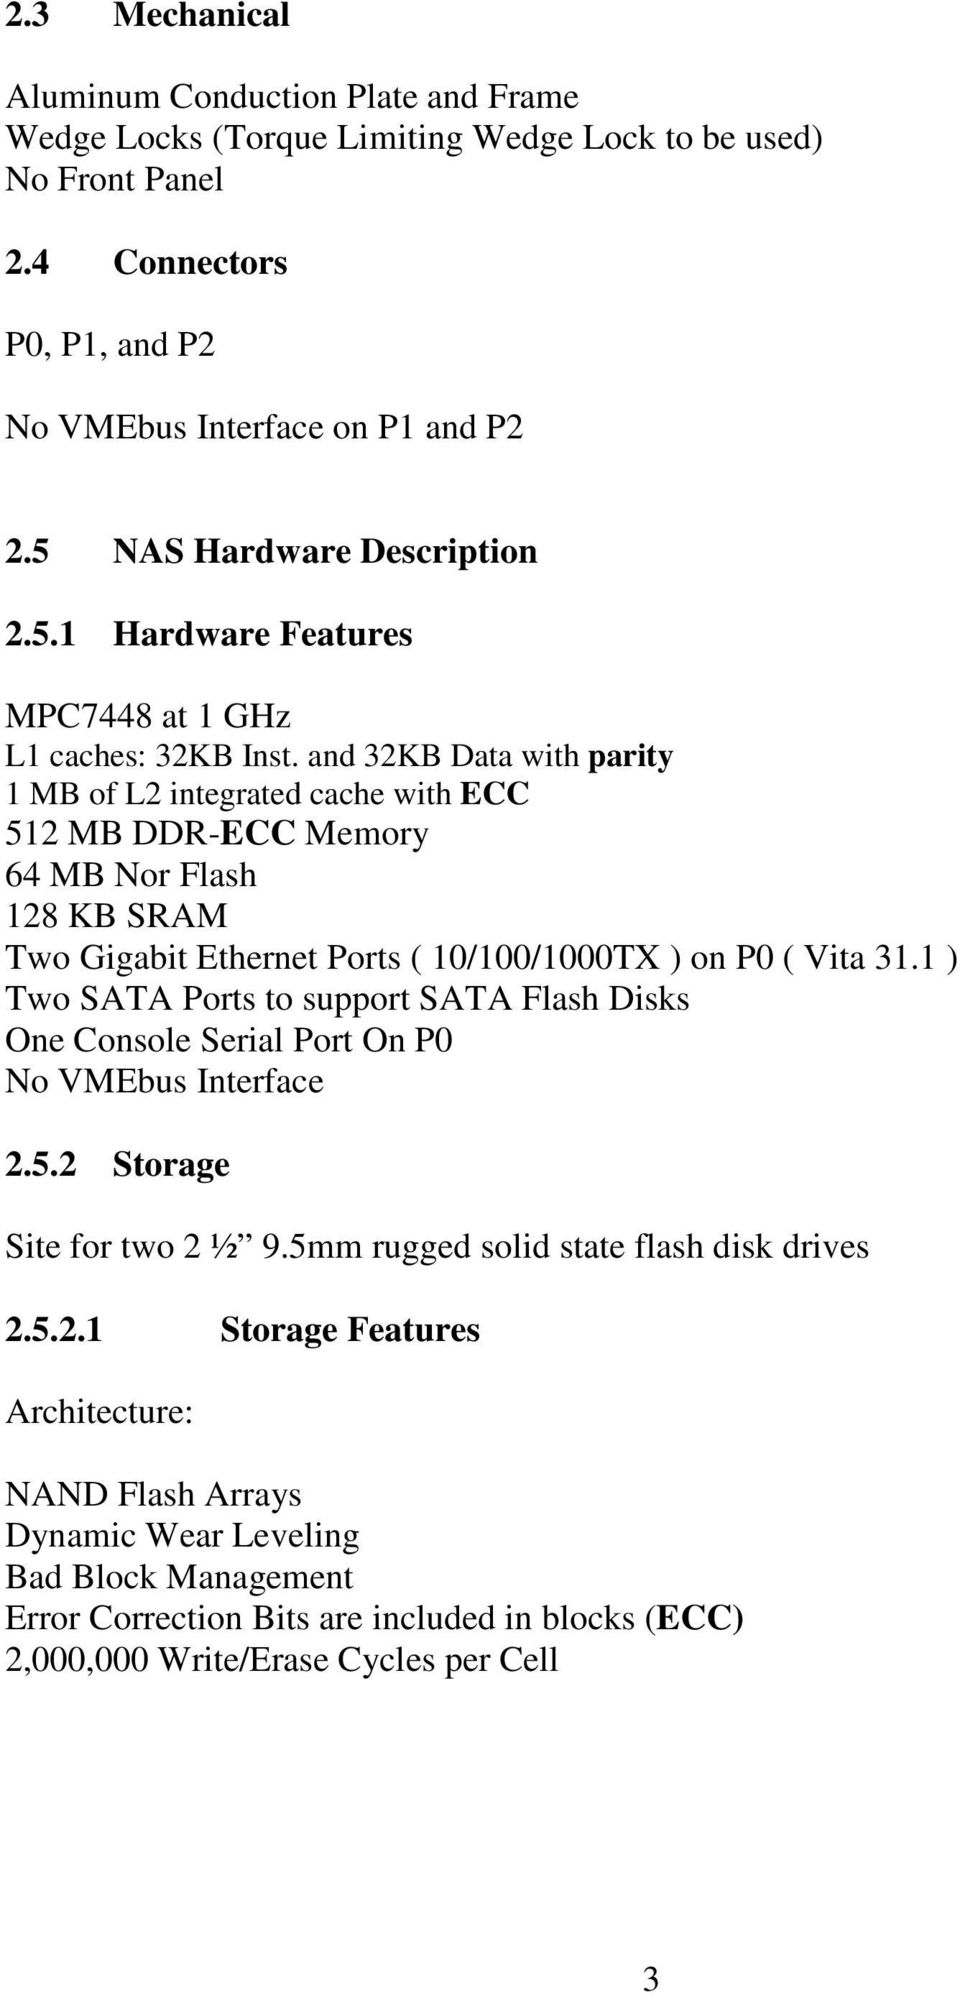 and 32KB Data with parity 1 MB of L2 integrated cache with ECC 512 MB DDR-ECC Memory 64 MB Nor Flash 128 KB SRAM Two Gigabit Ethernet Ports ( 10/100/1000TX ) on P0 ( Vita 31.